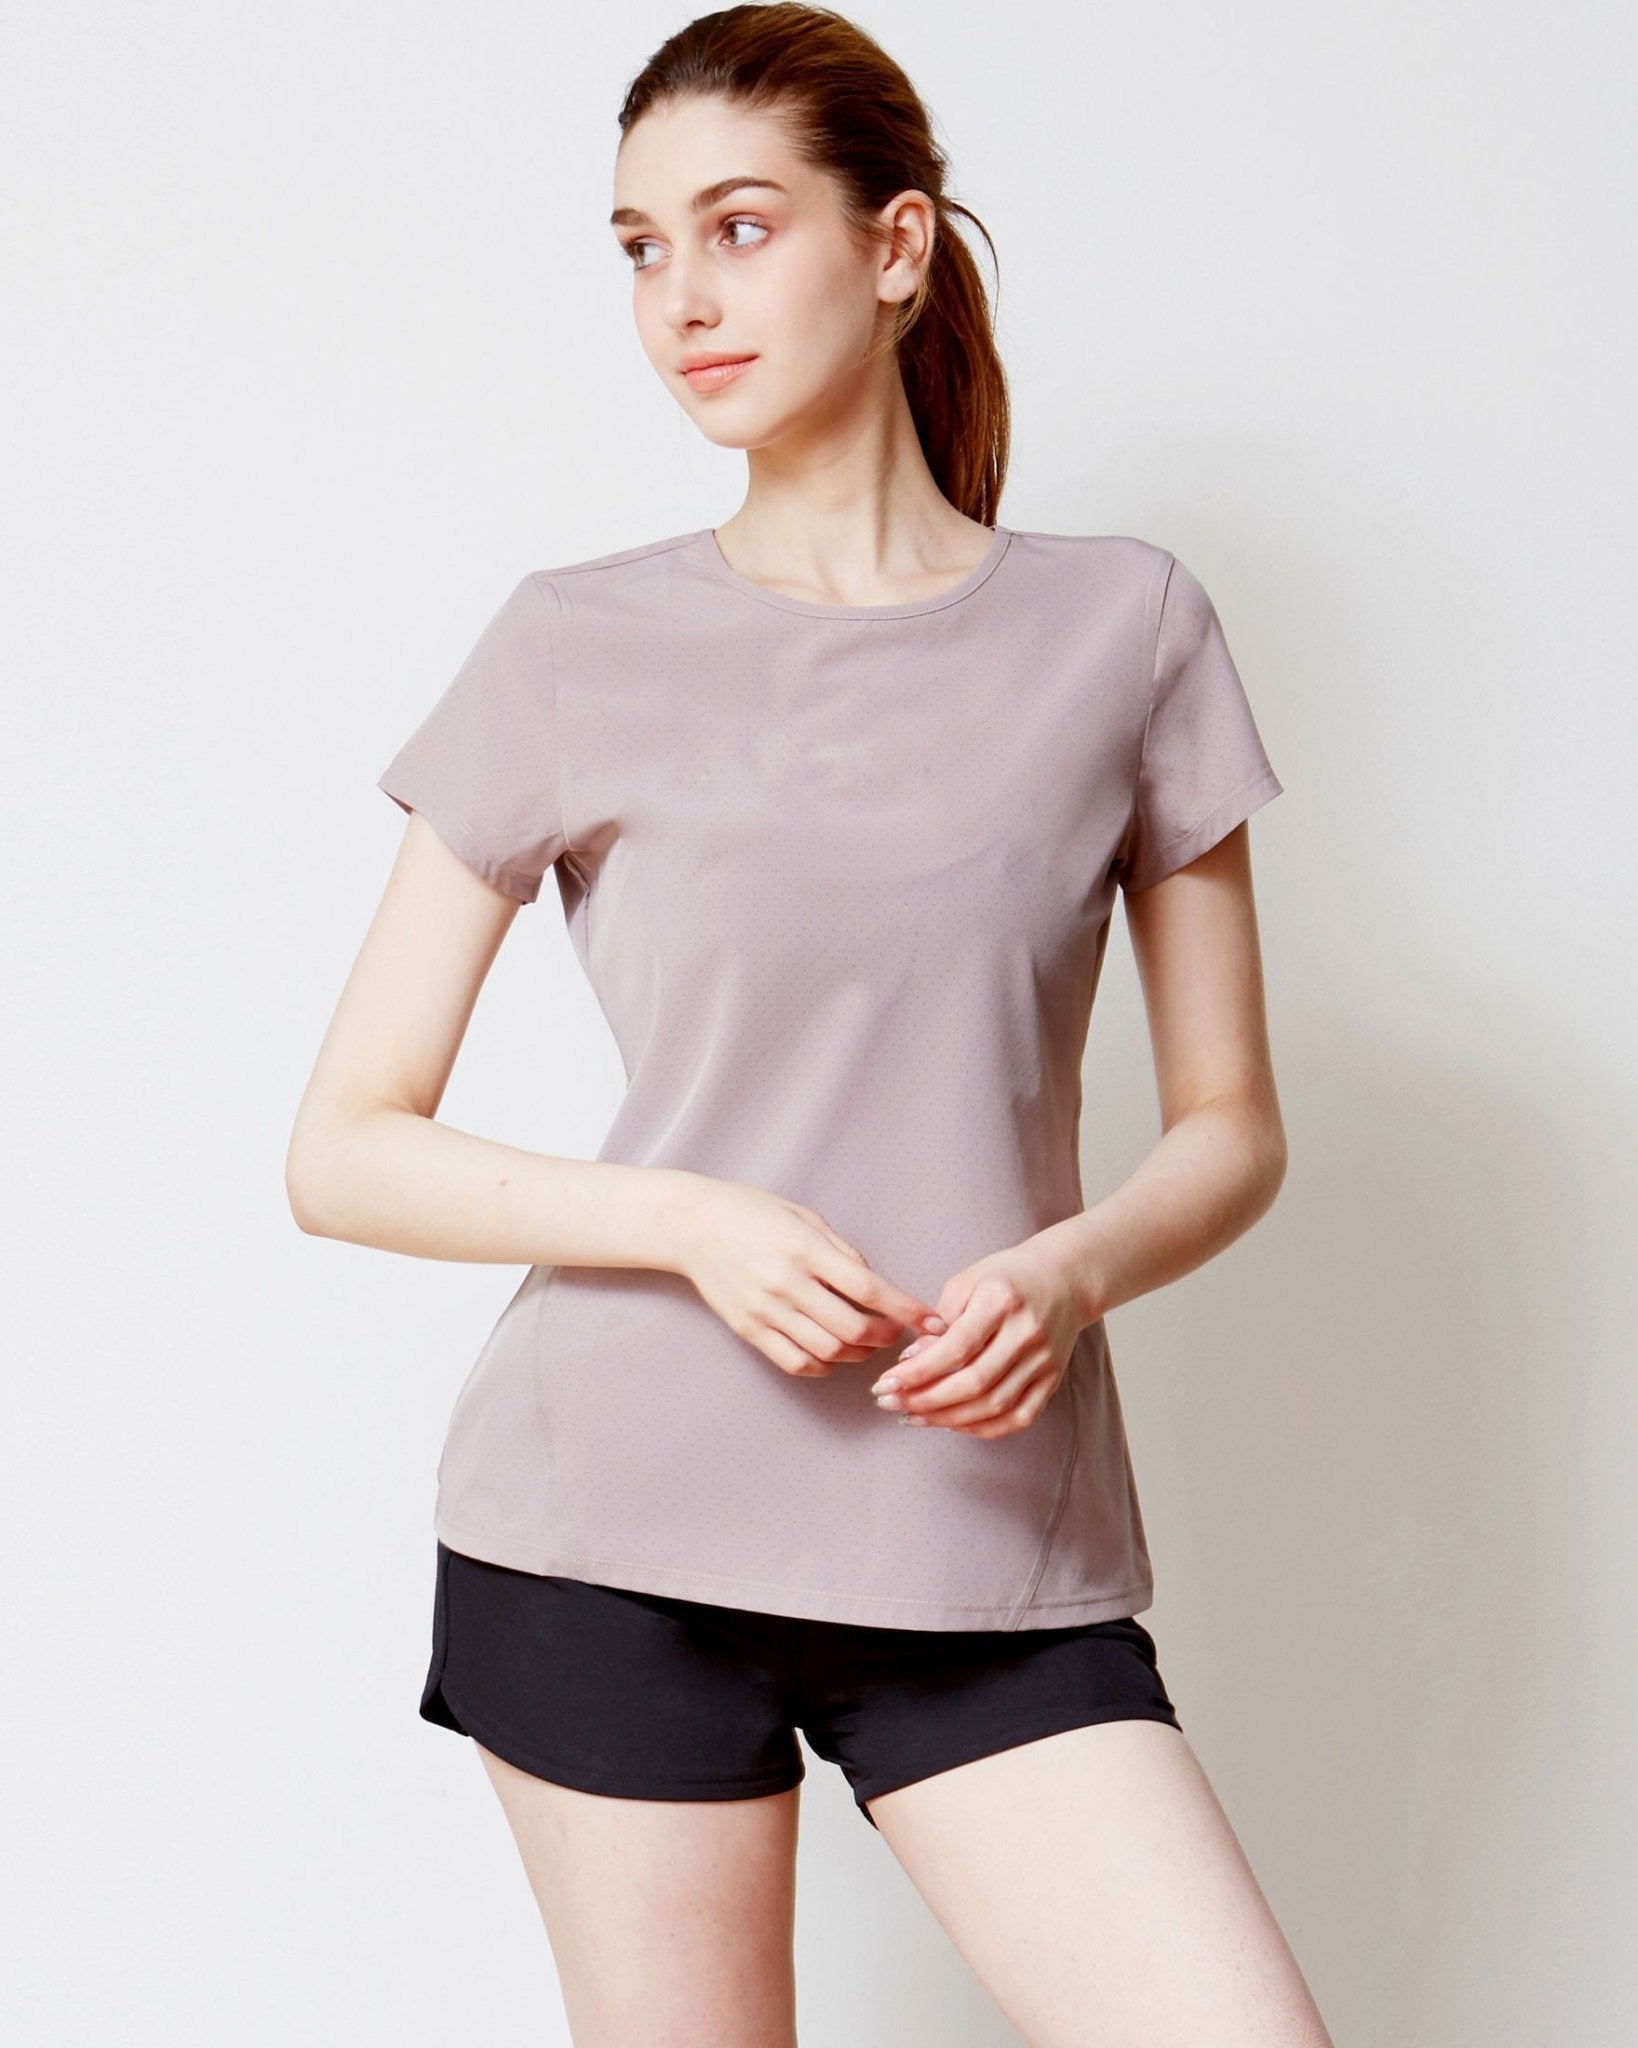 Airy Mile Laser Cut Mesh Top - Guy Christopher